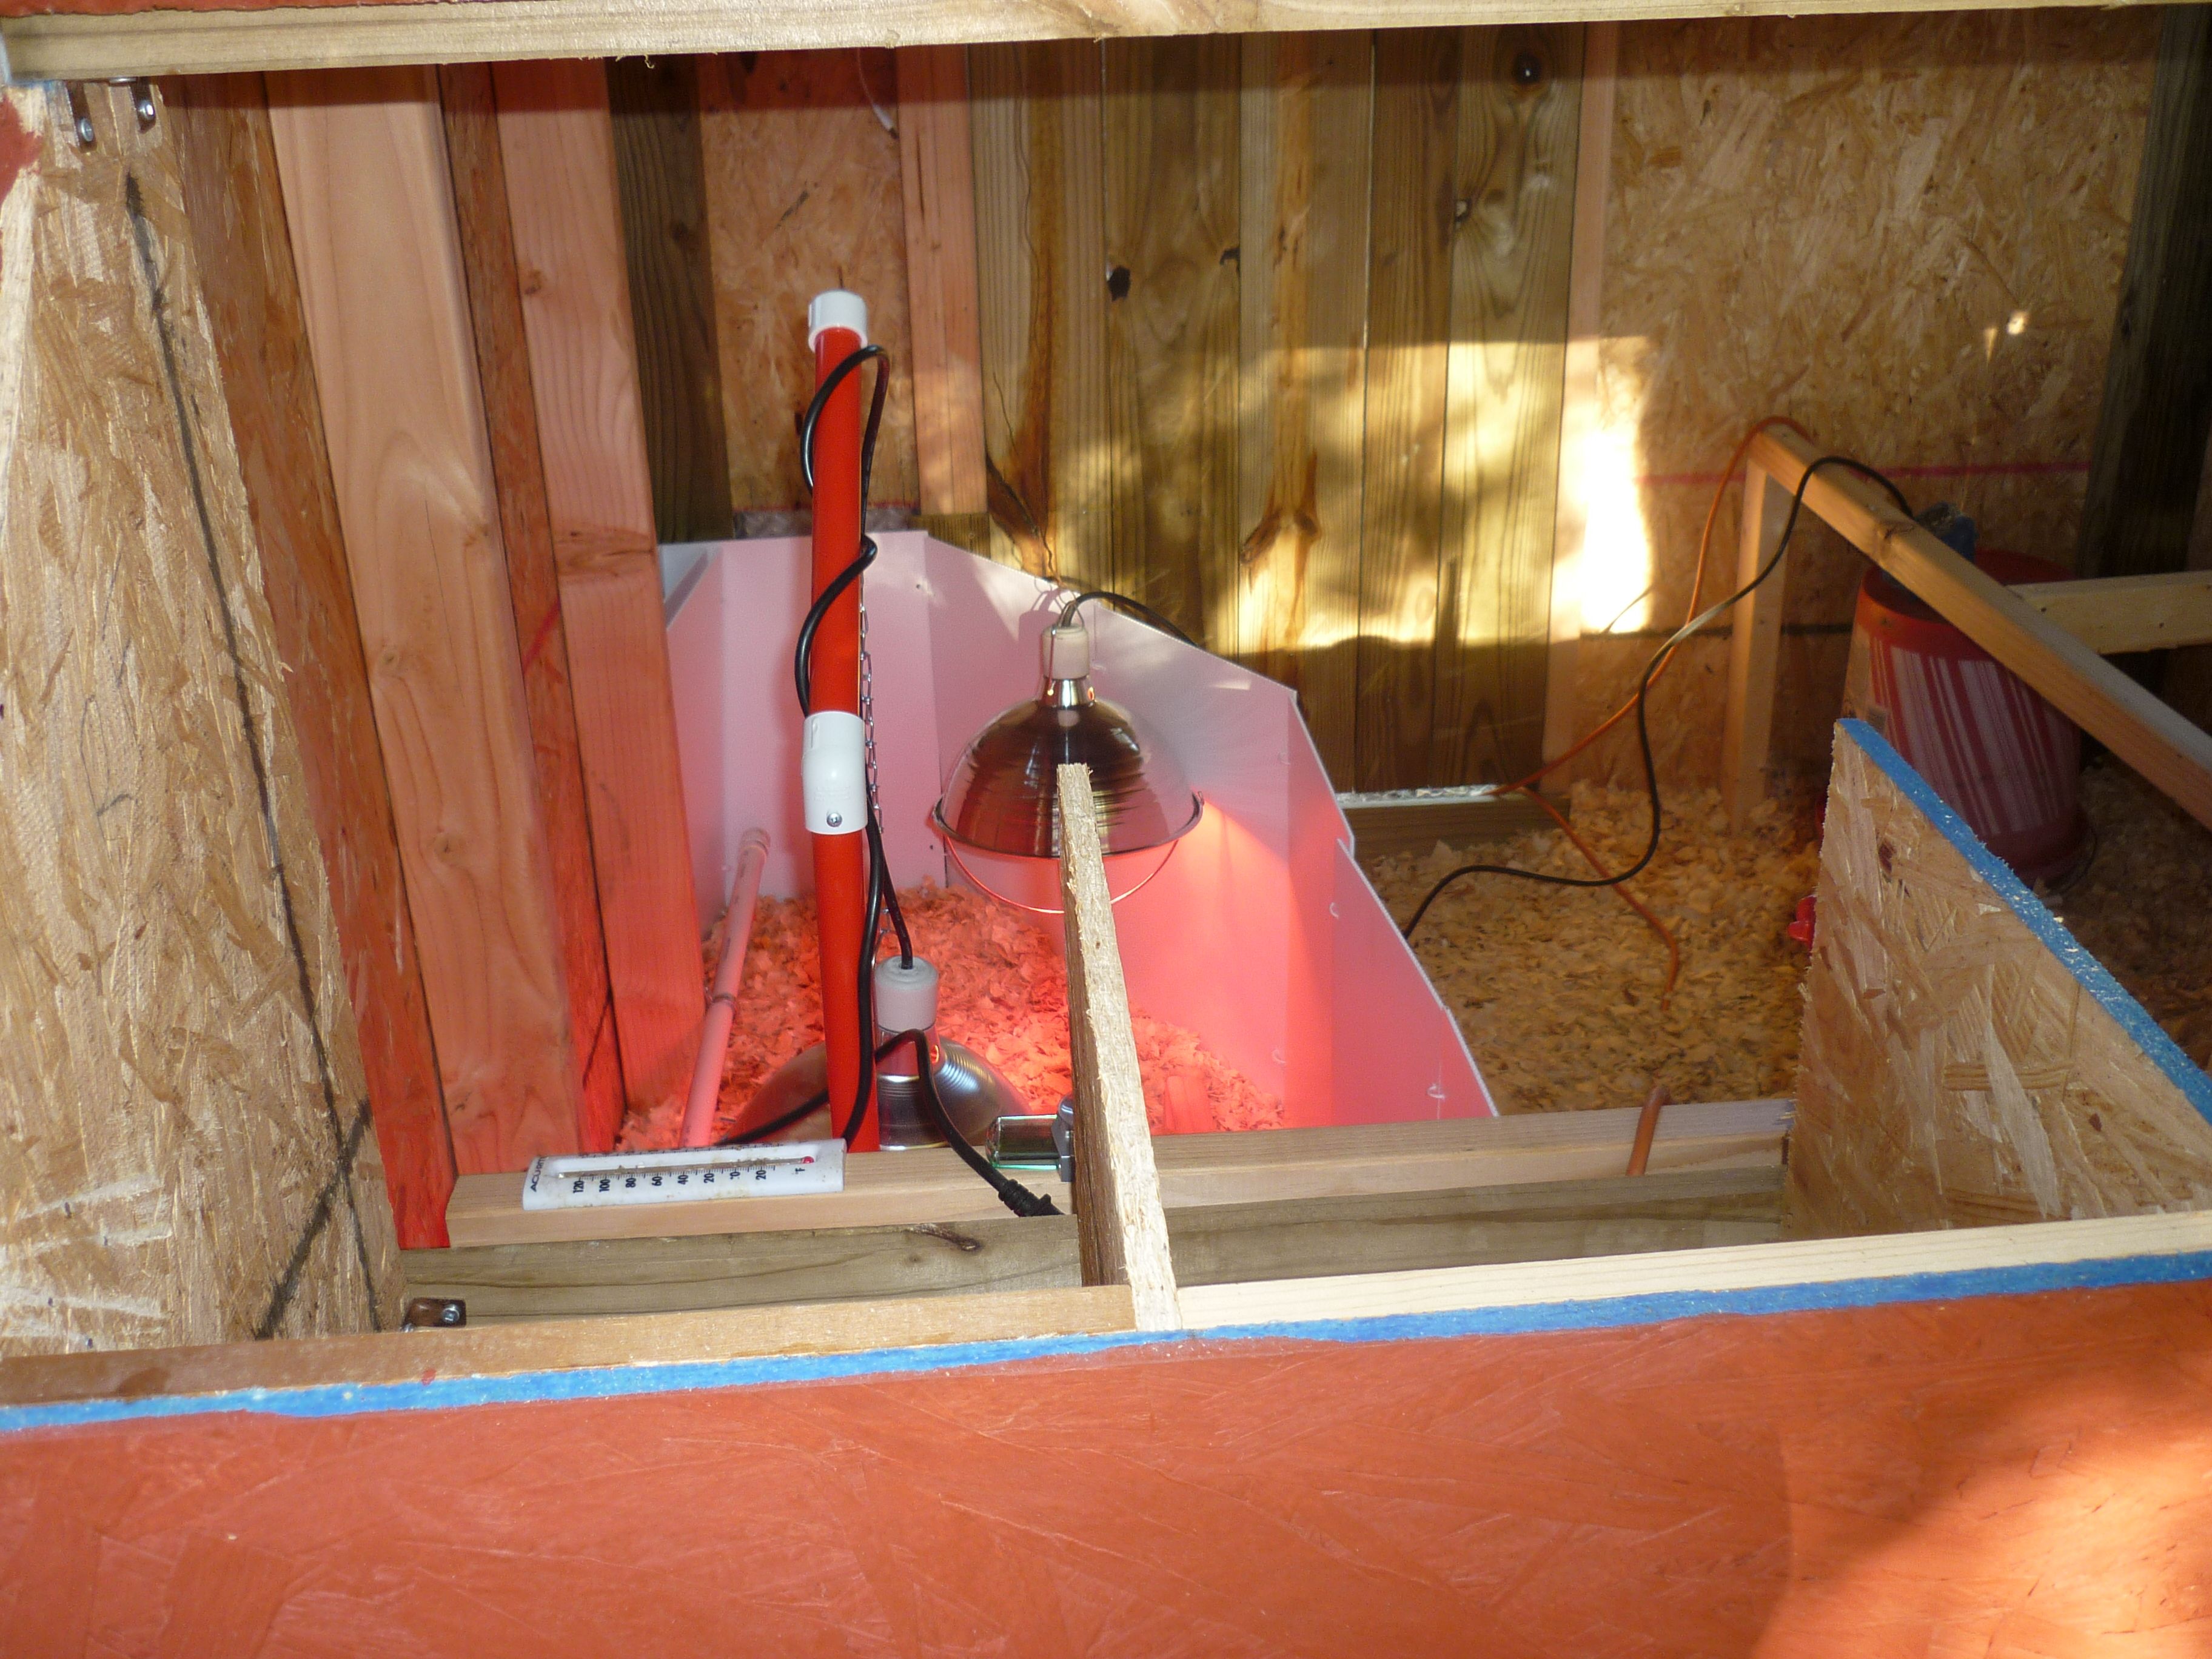 This is a view of the inside of the coop from the nesting boxes.